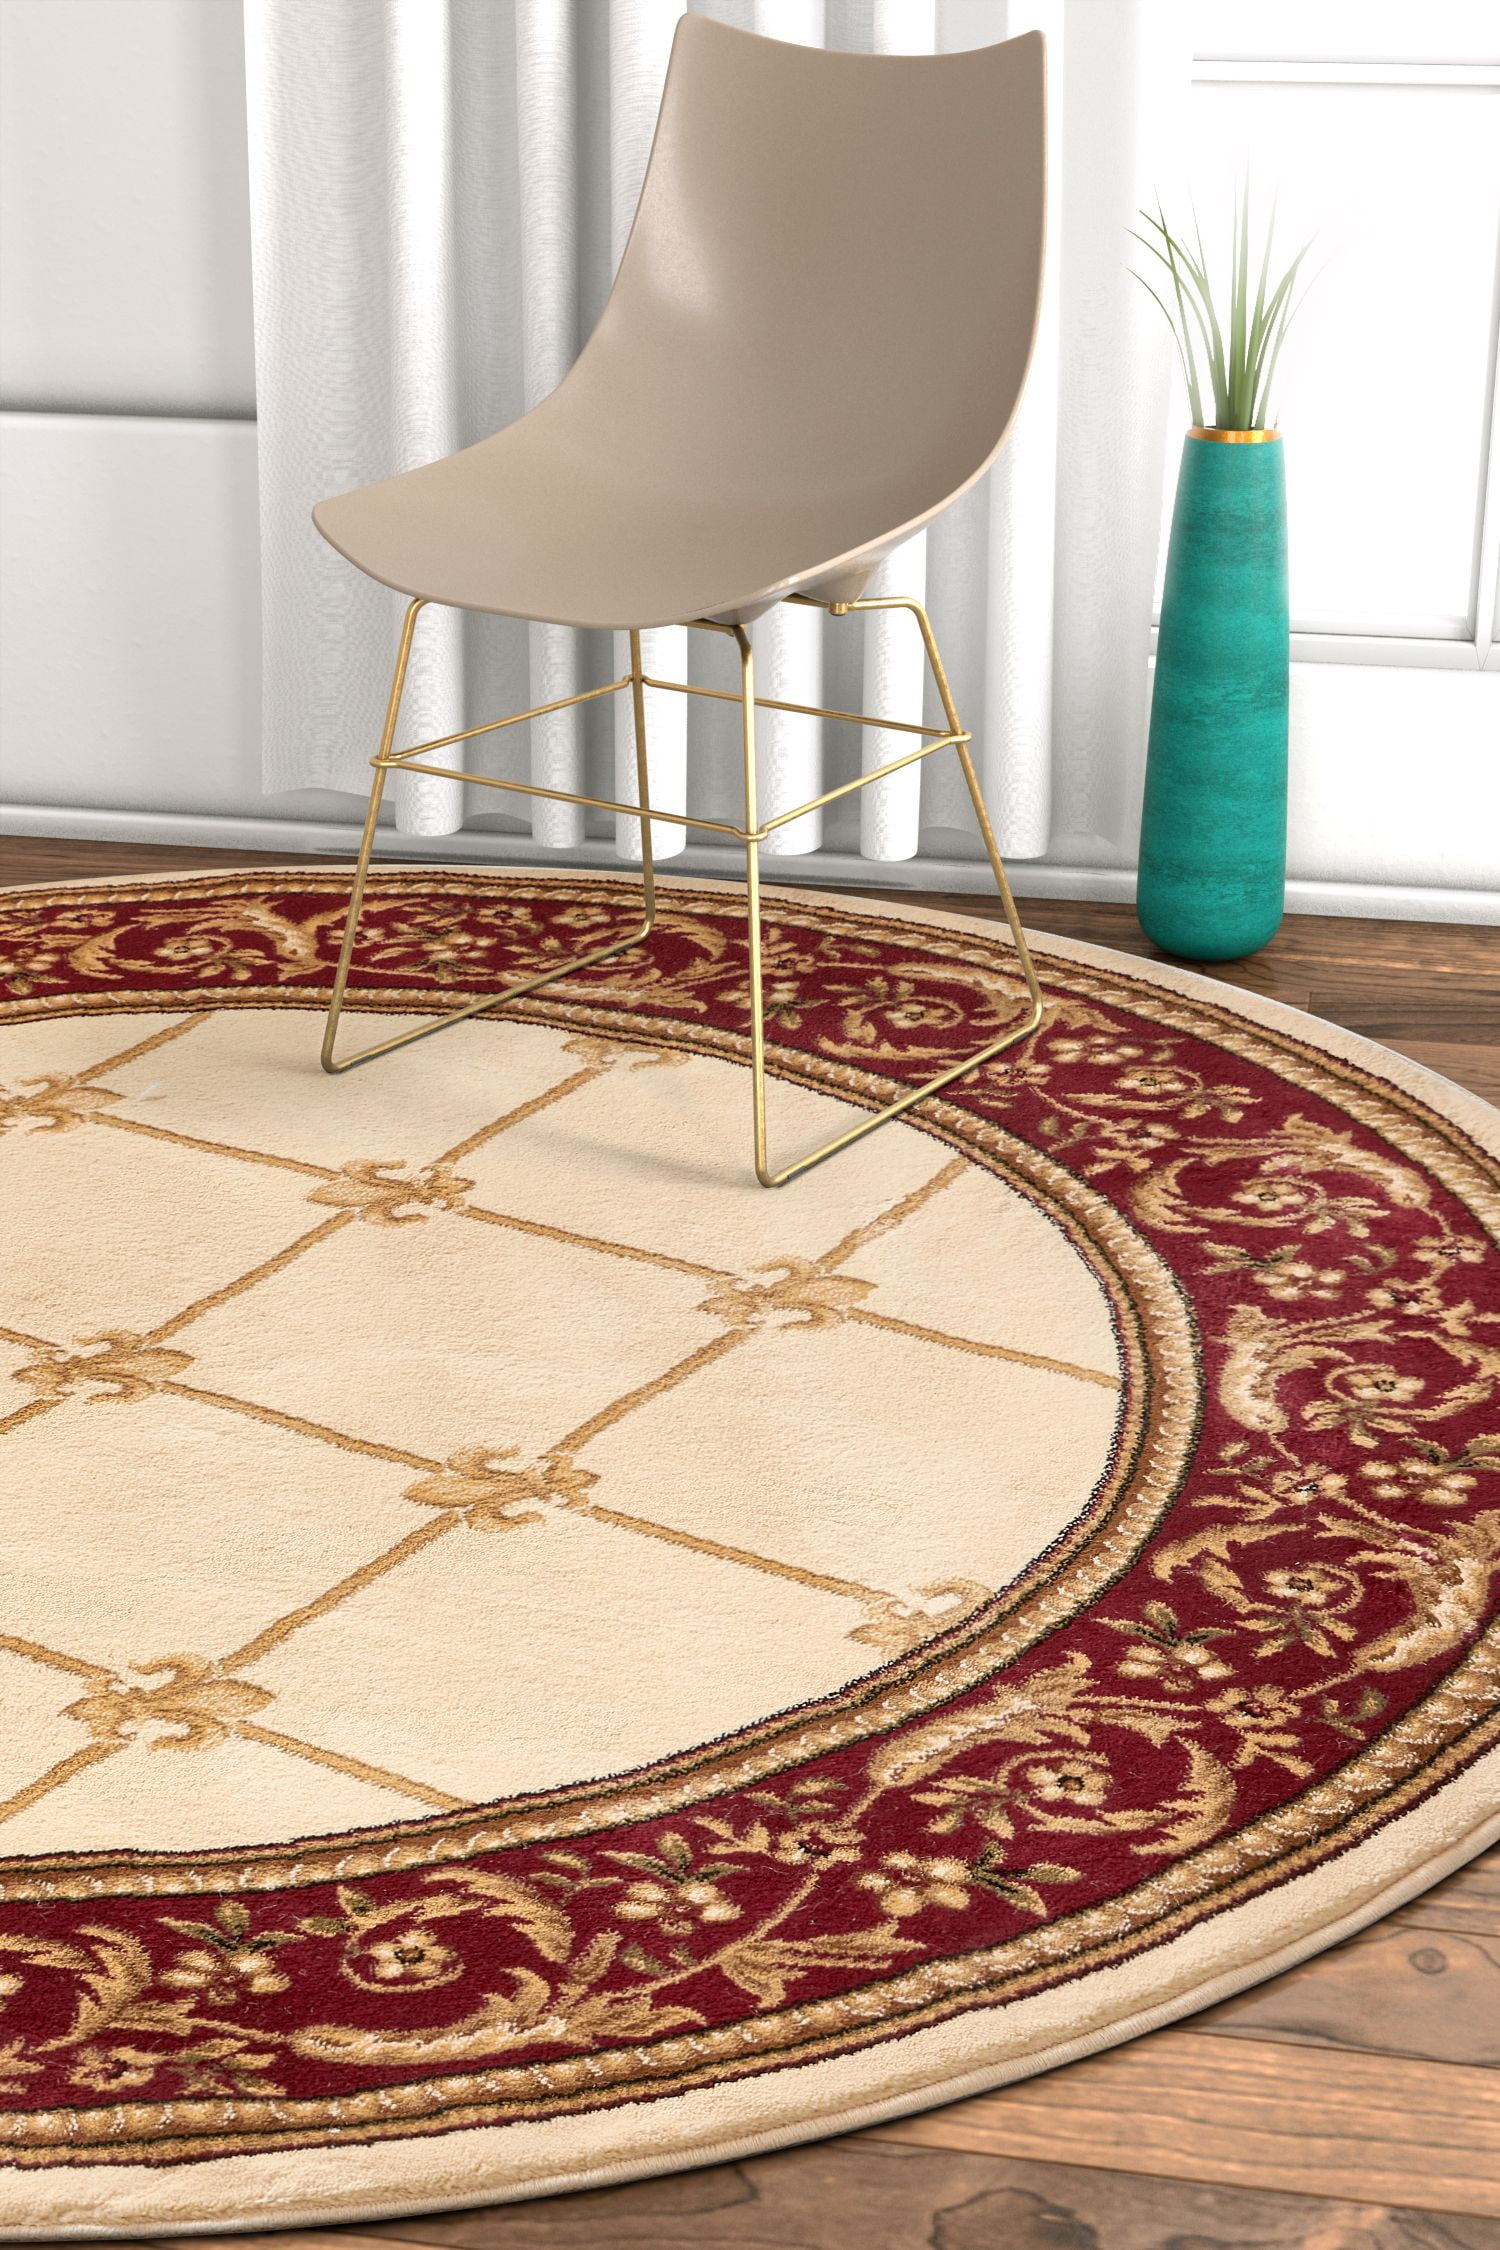 Well Woven Barclay Vane Willow Damask Beige Modern Area Rug 7'10'' Round